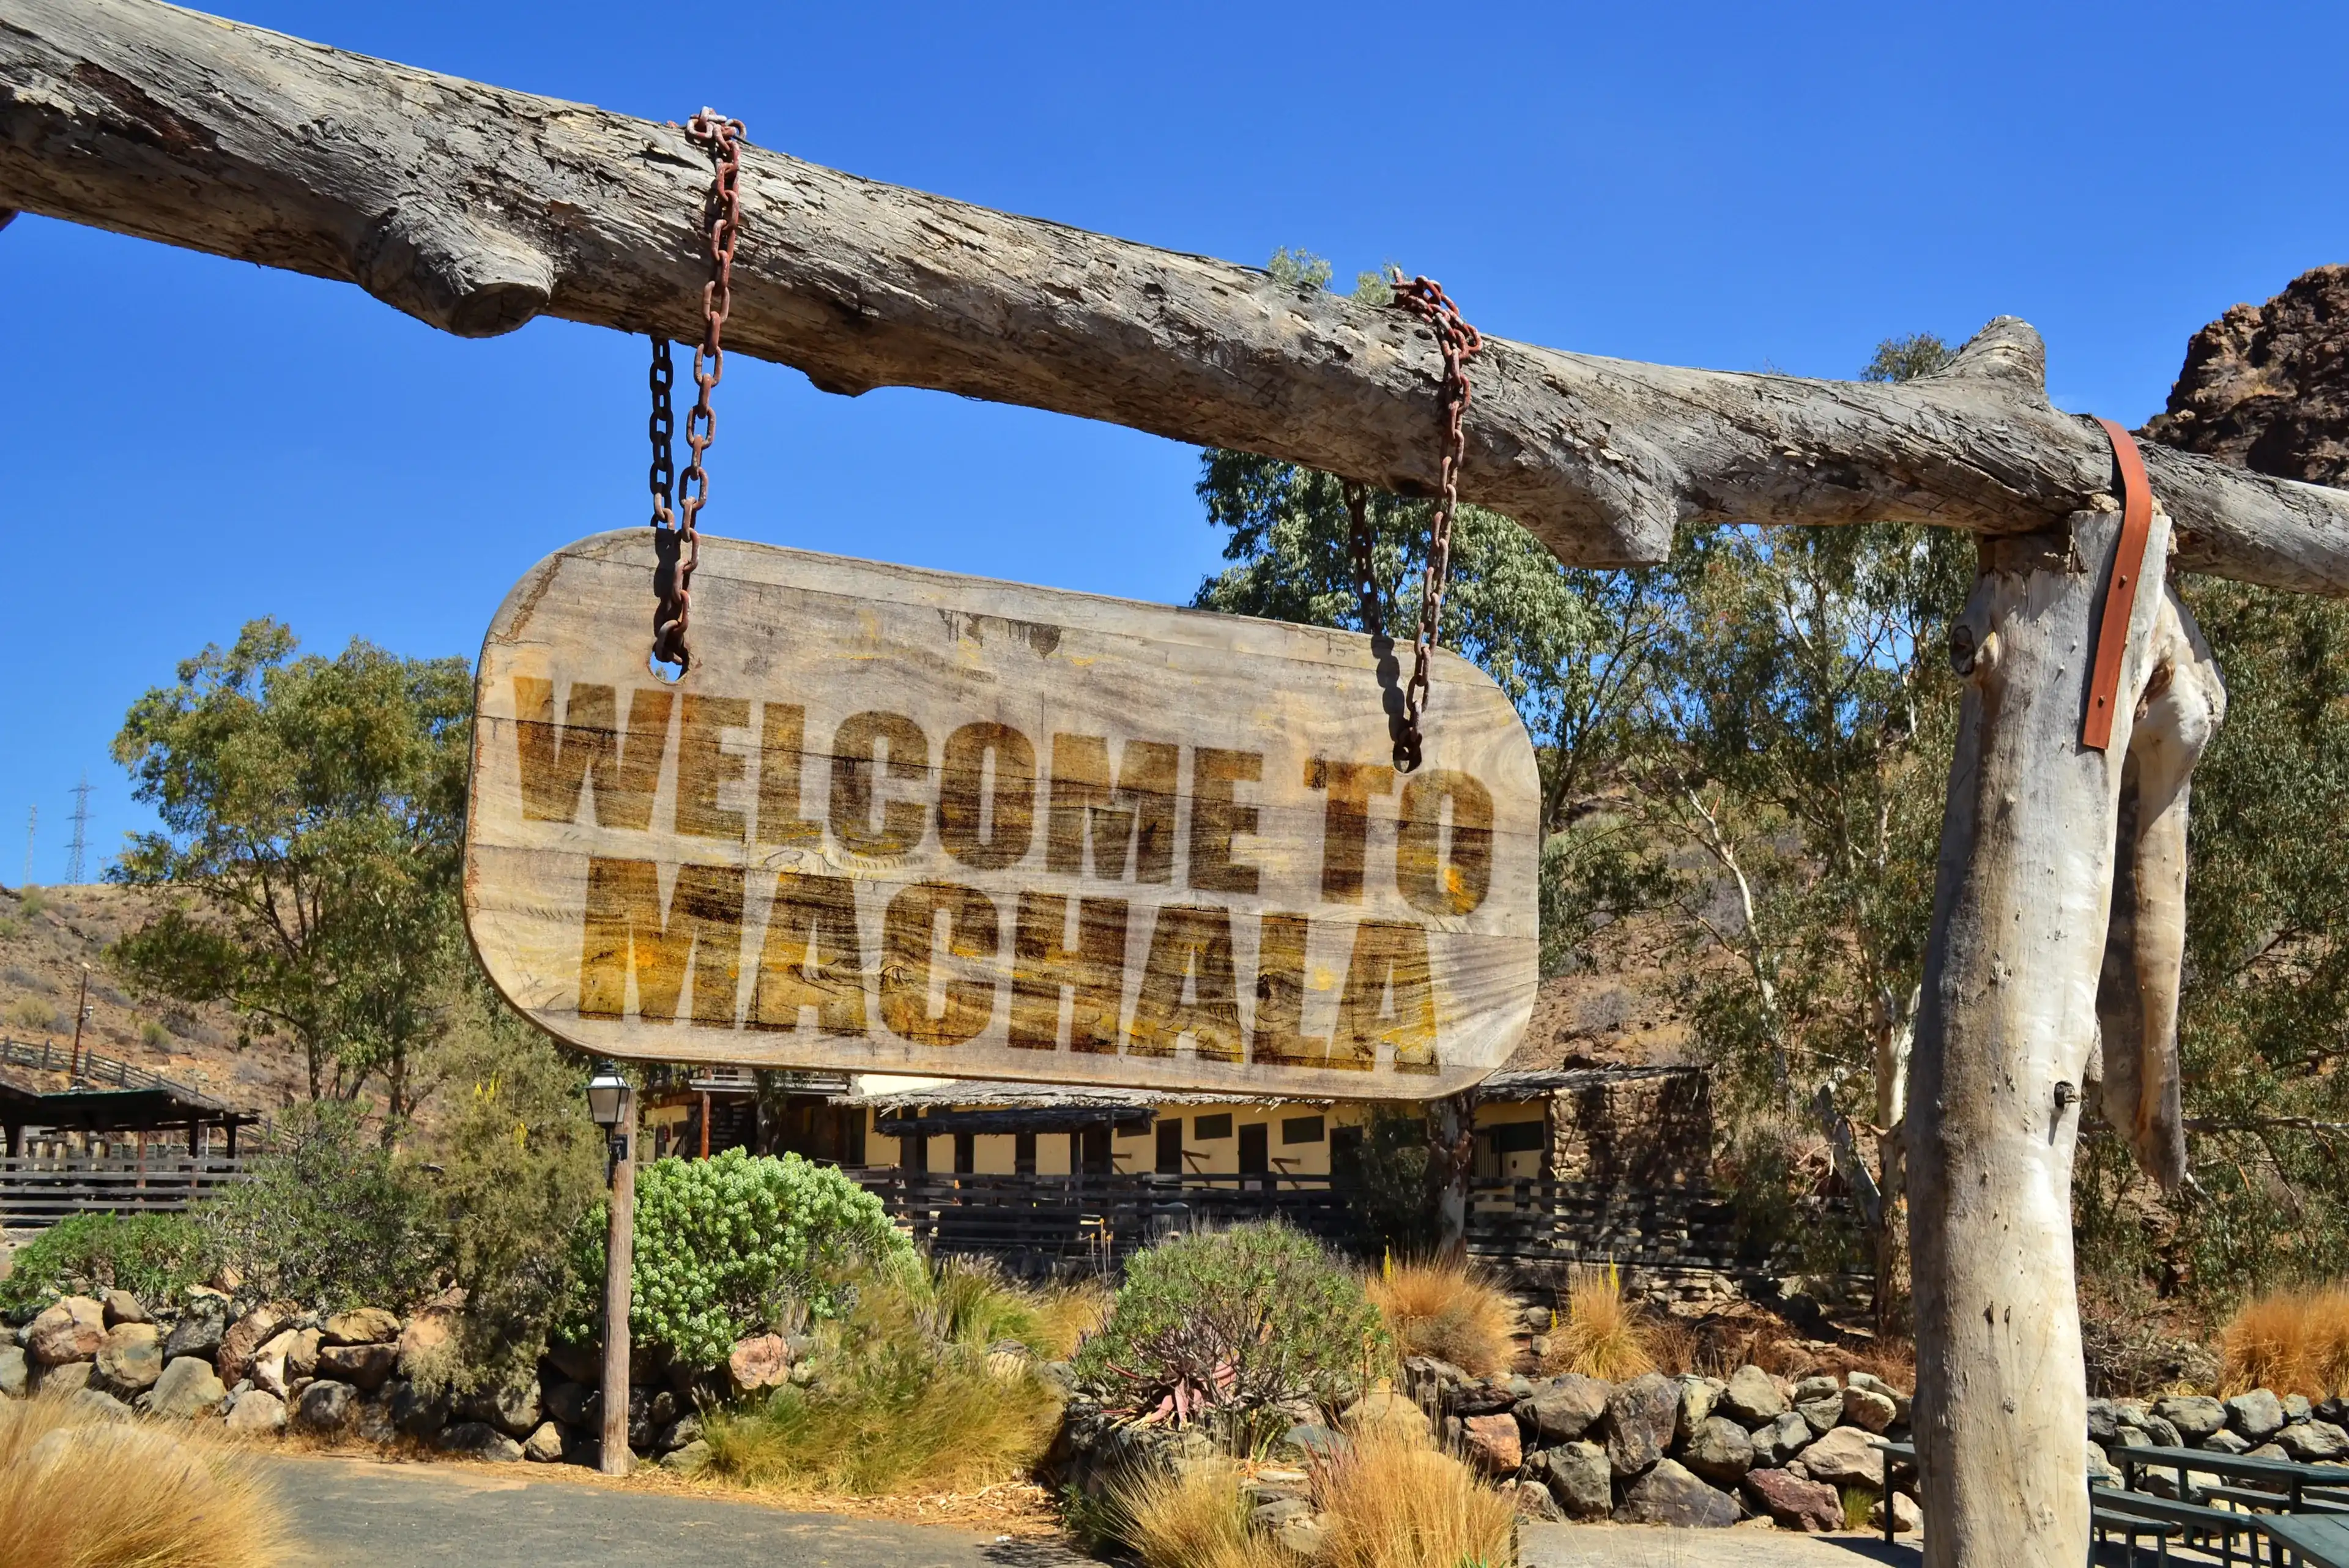 old vintage wood signboard with text " welcome to Machala" hanging on a branch